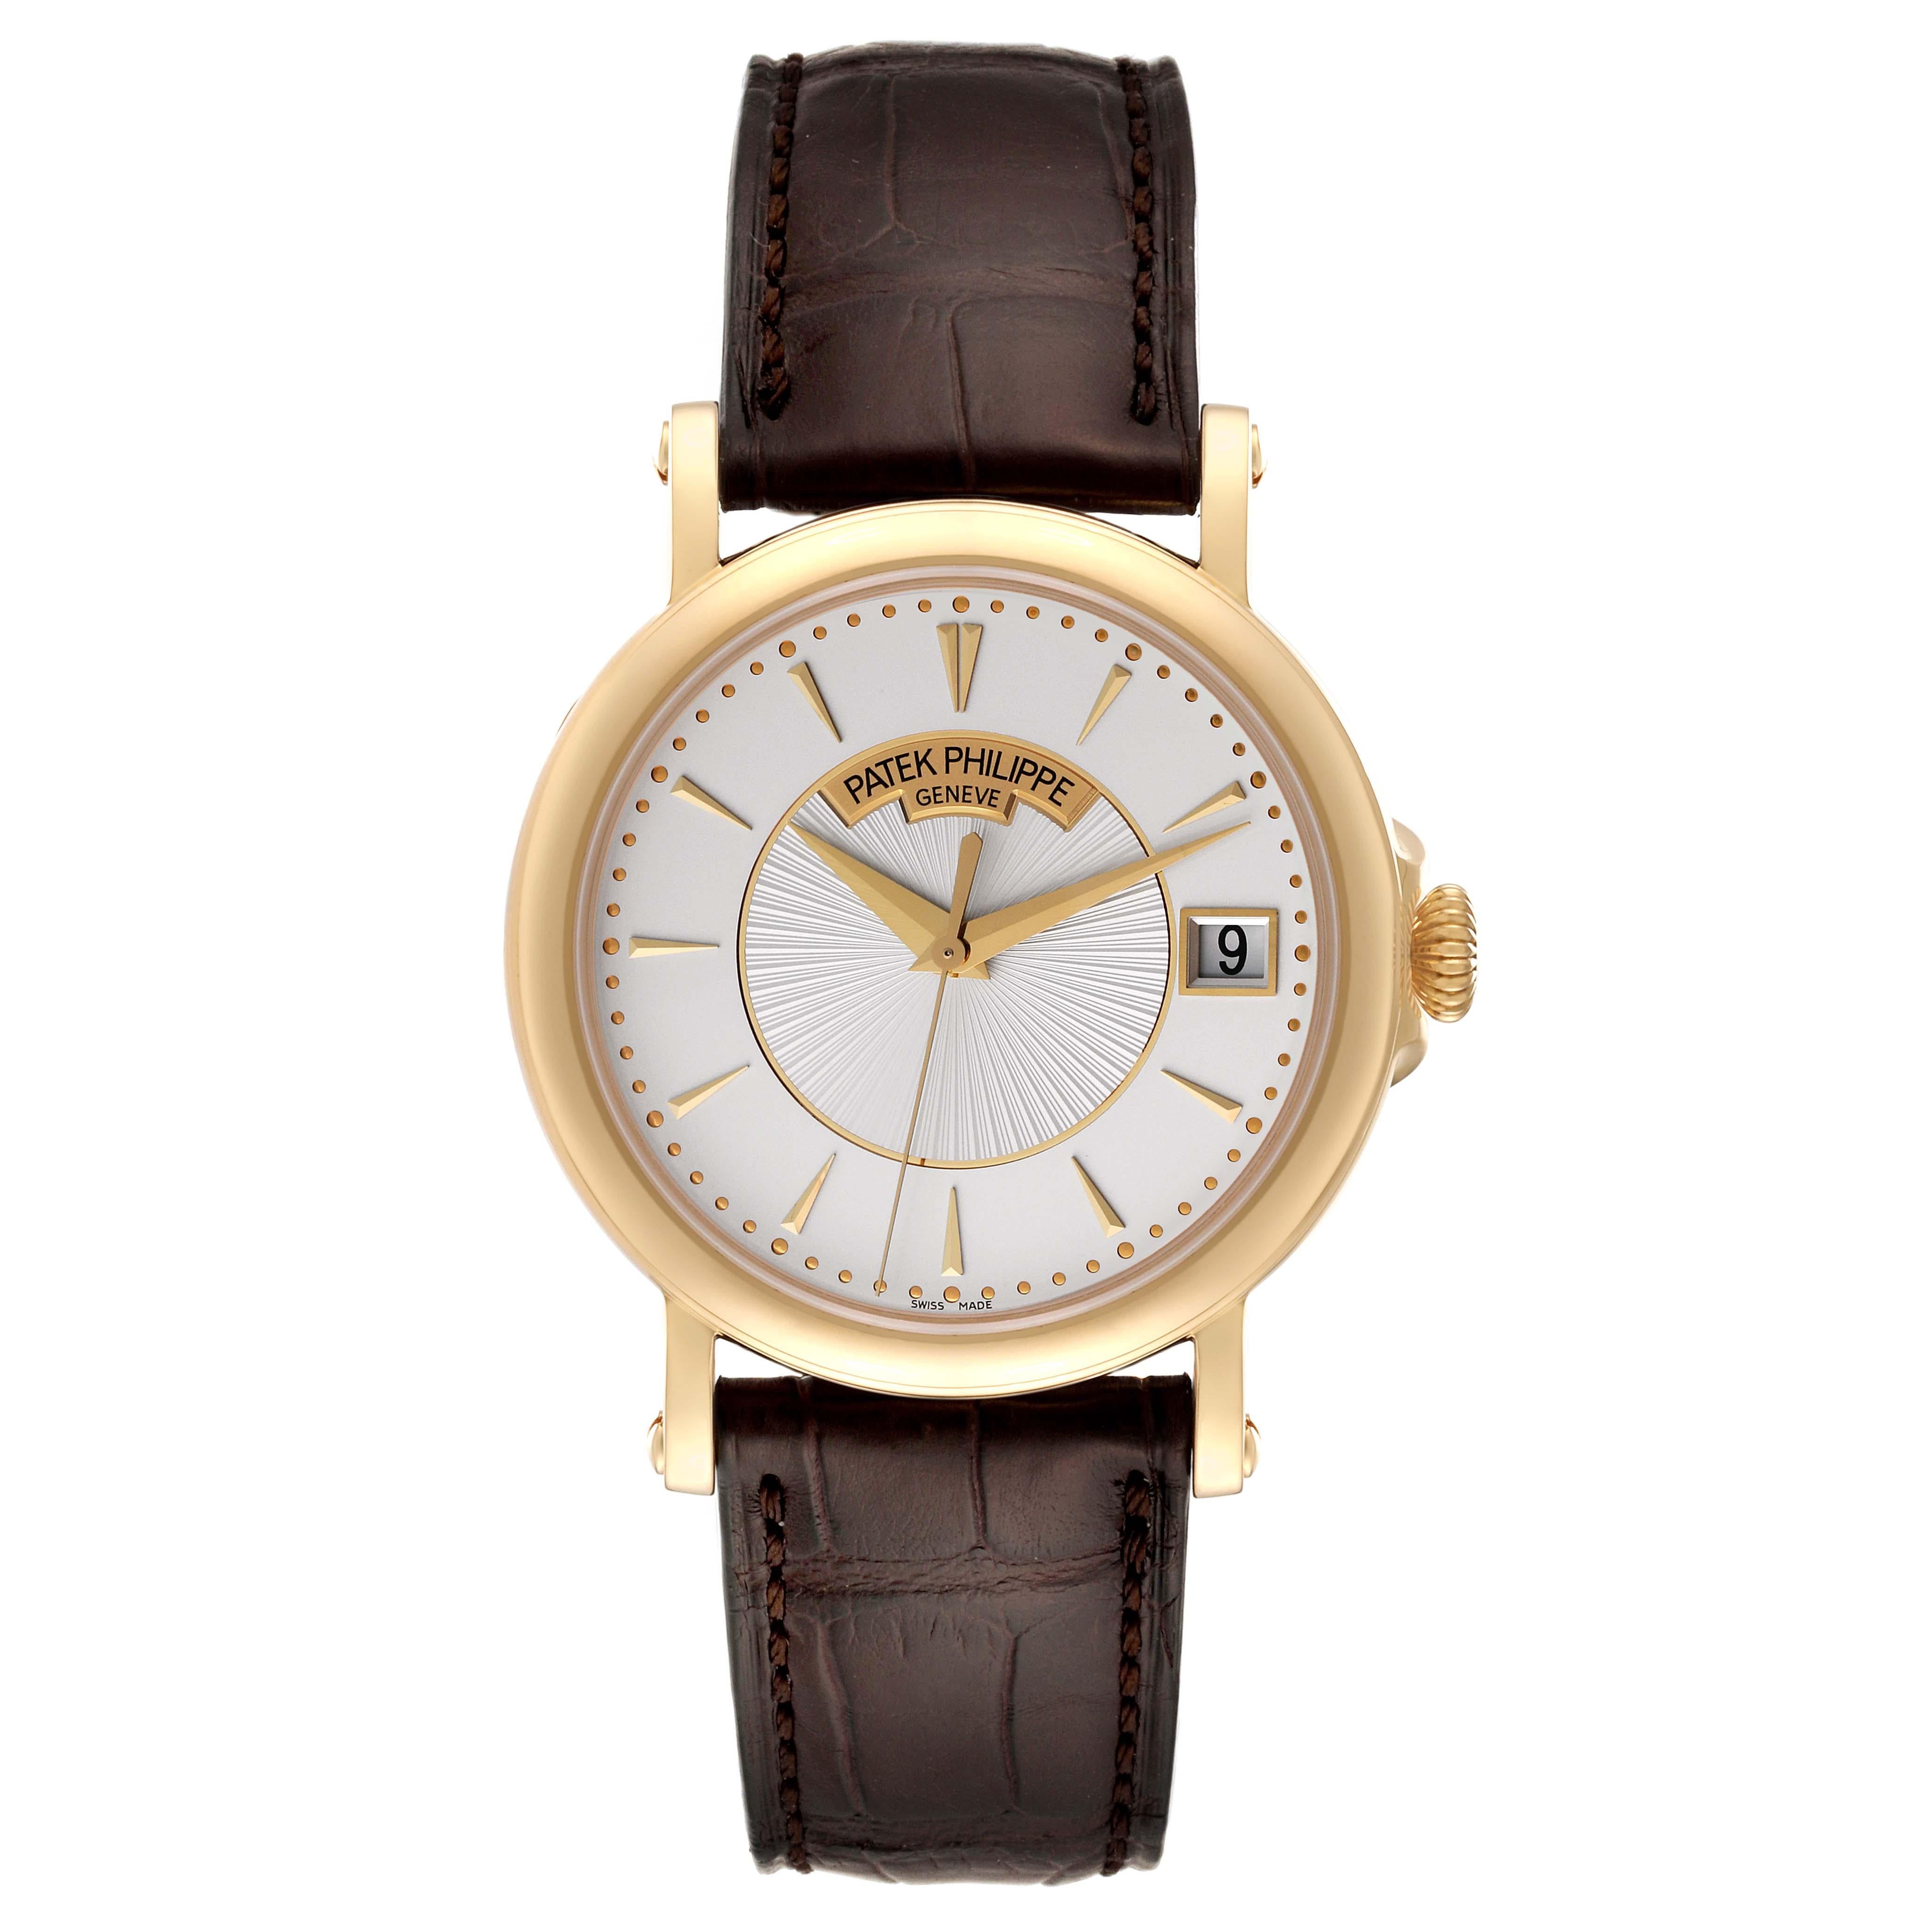 Patek Philippe Calatrava Yellow Gold Silver Dial Mens Watch 5153J Papers. Automatic self-winding movement. 18K yellow gold 38.0 mm in diameter. Hinged case back over exhibition transparent sapphire crystal to view the movement. Extended screwed